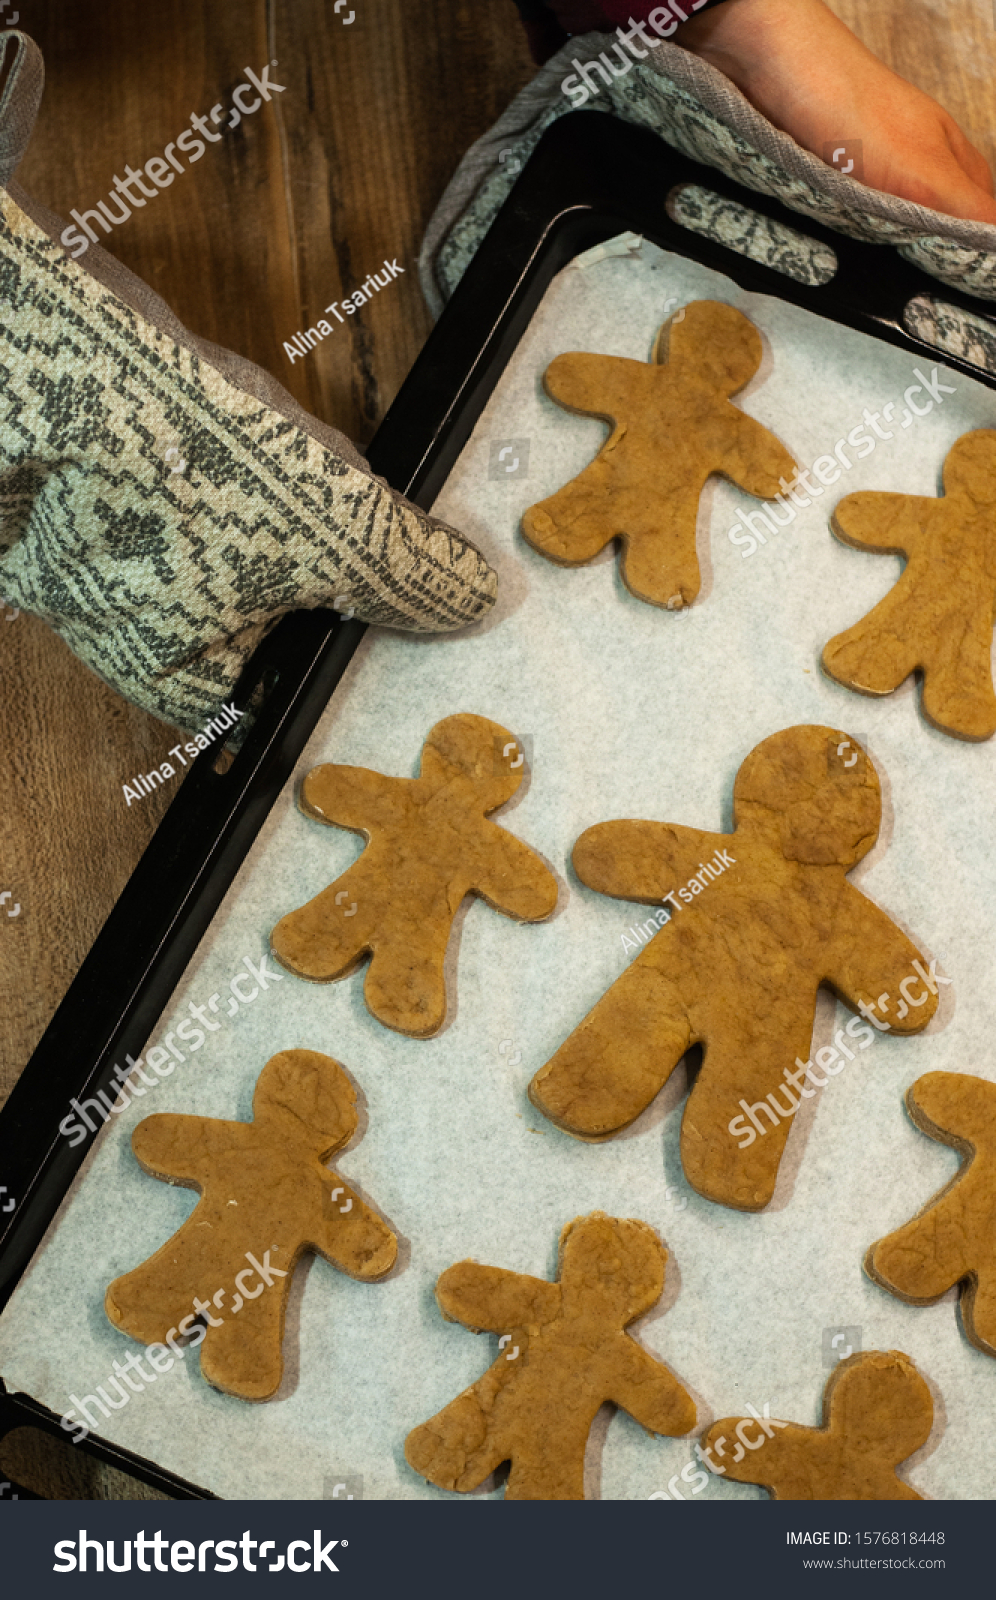 Fresh baked homemade Chritstmas gingerbread cookie on a baking tray. #1576818448